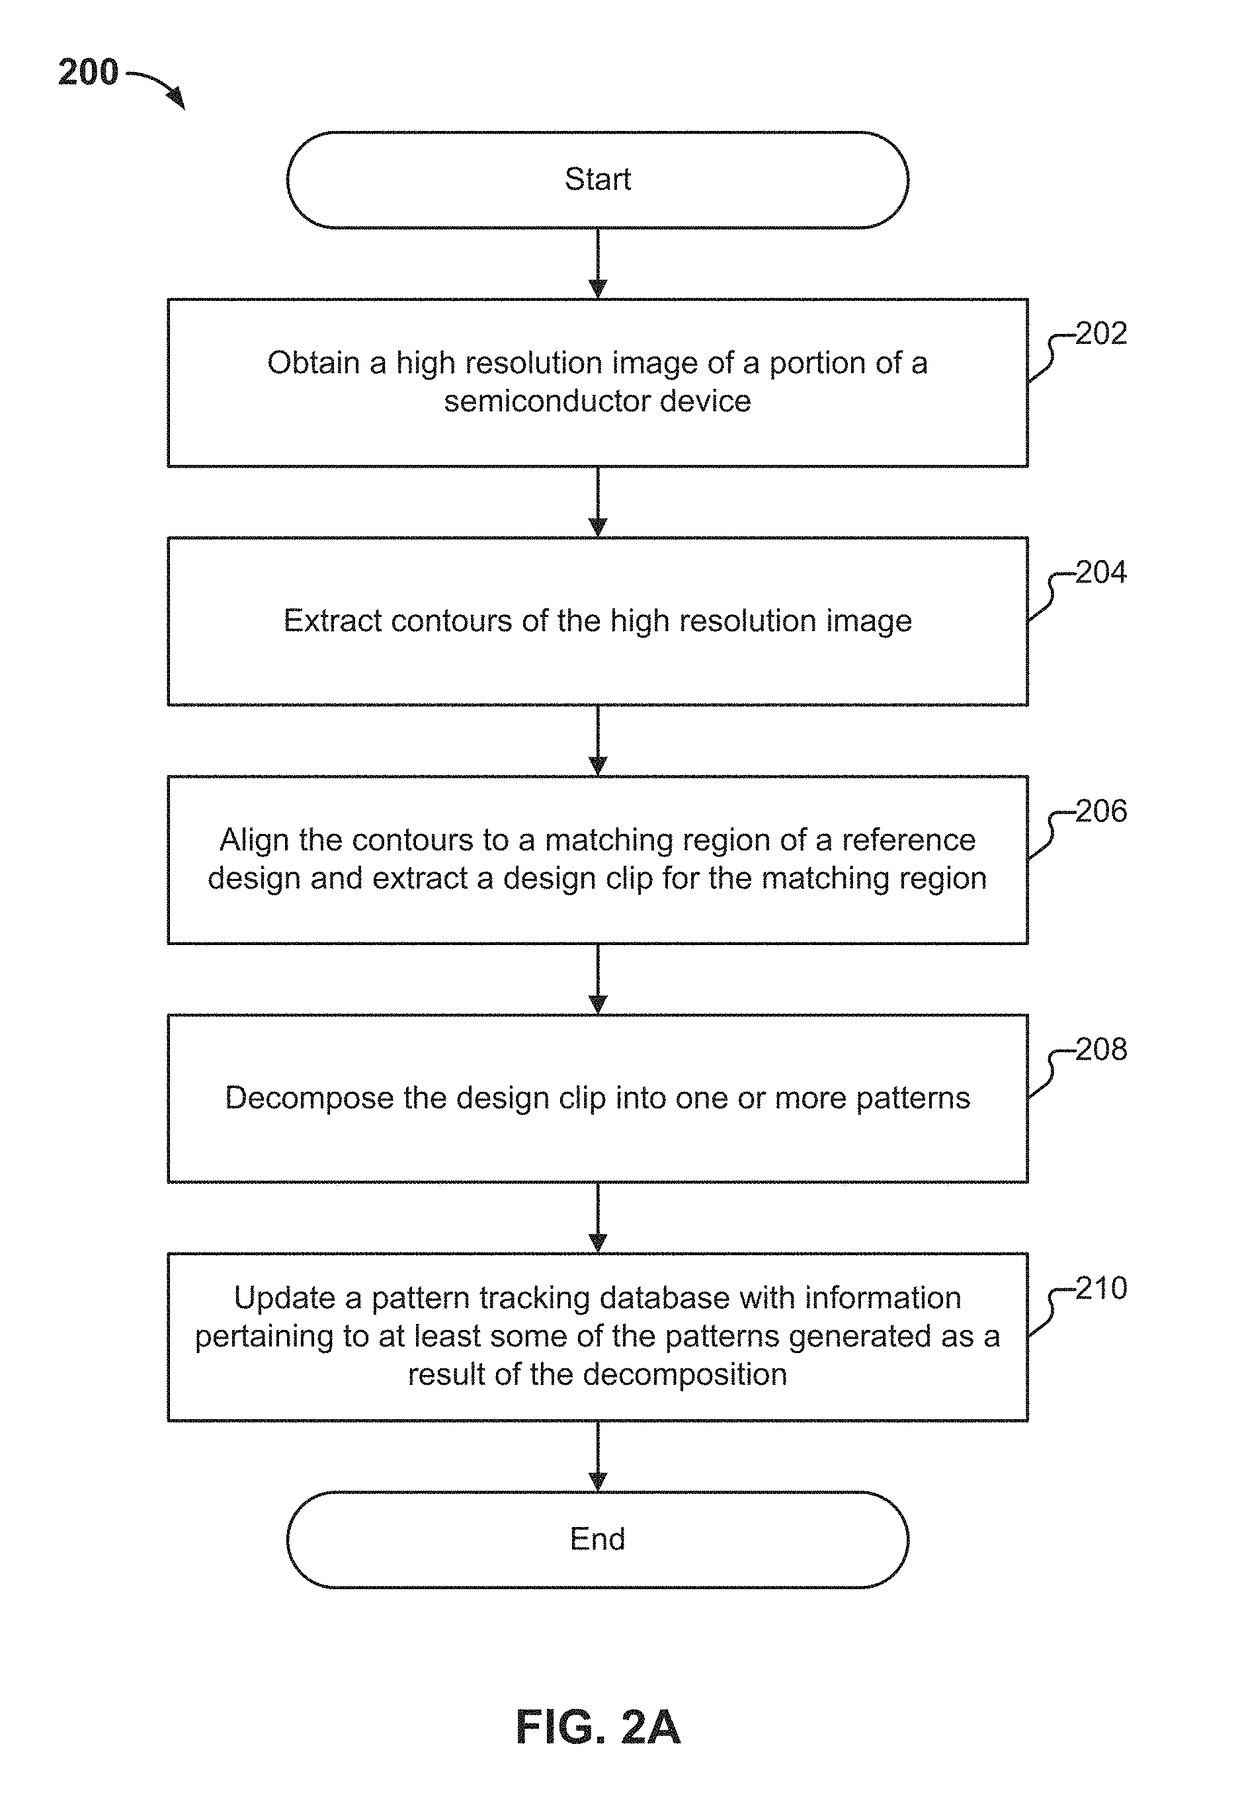 Pattern weakness and strength detection and tracking during a semiconductor device fabrication process